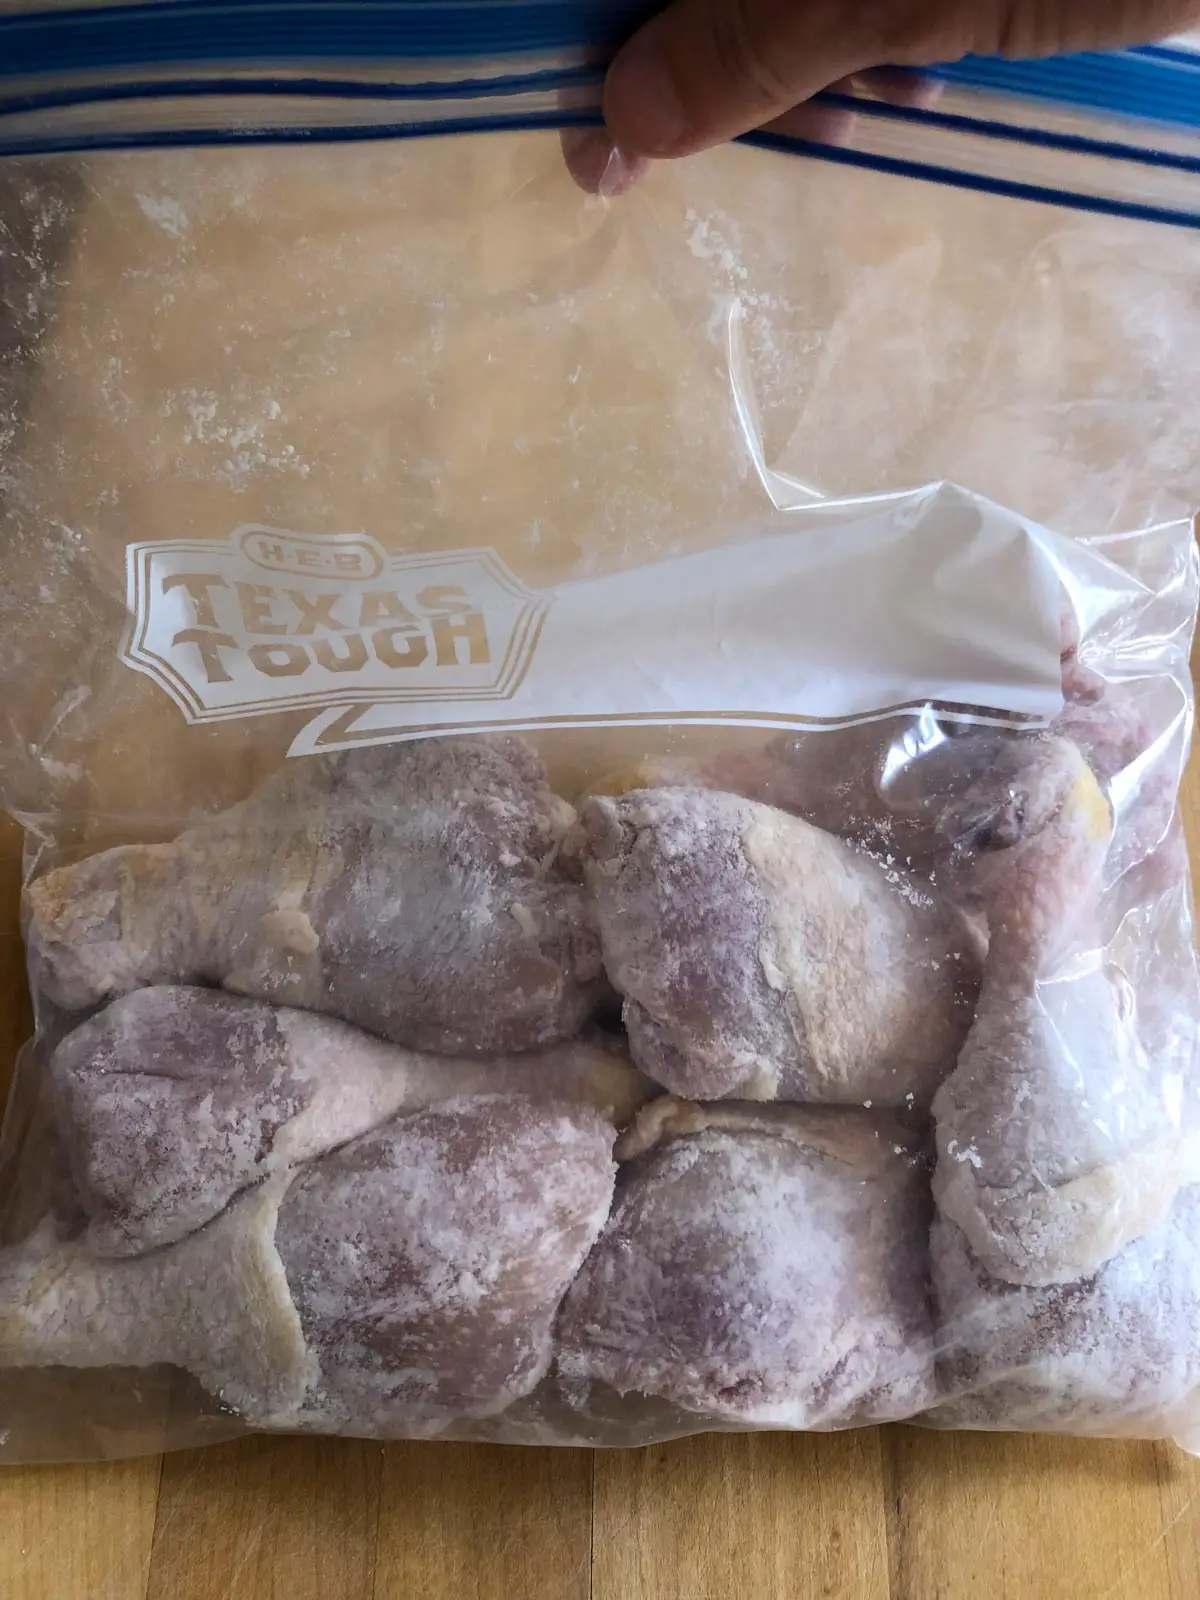 Chicken drumsticks covered with baking powder in a plastic zip bag.